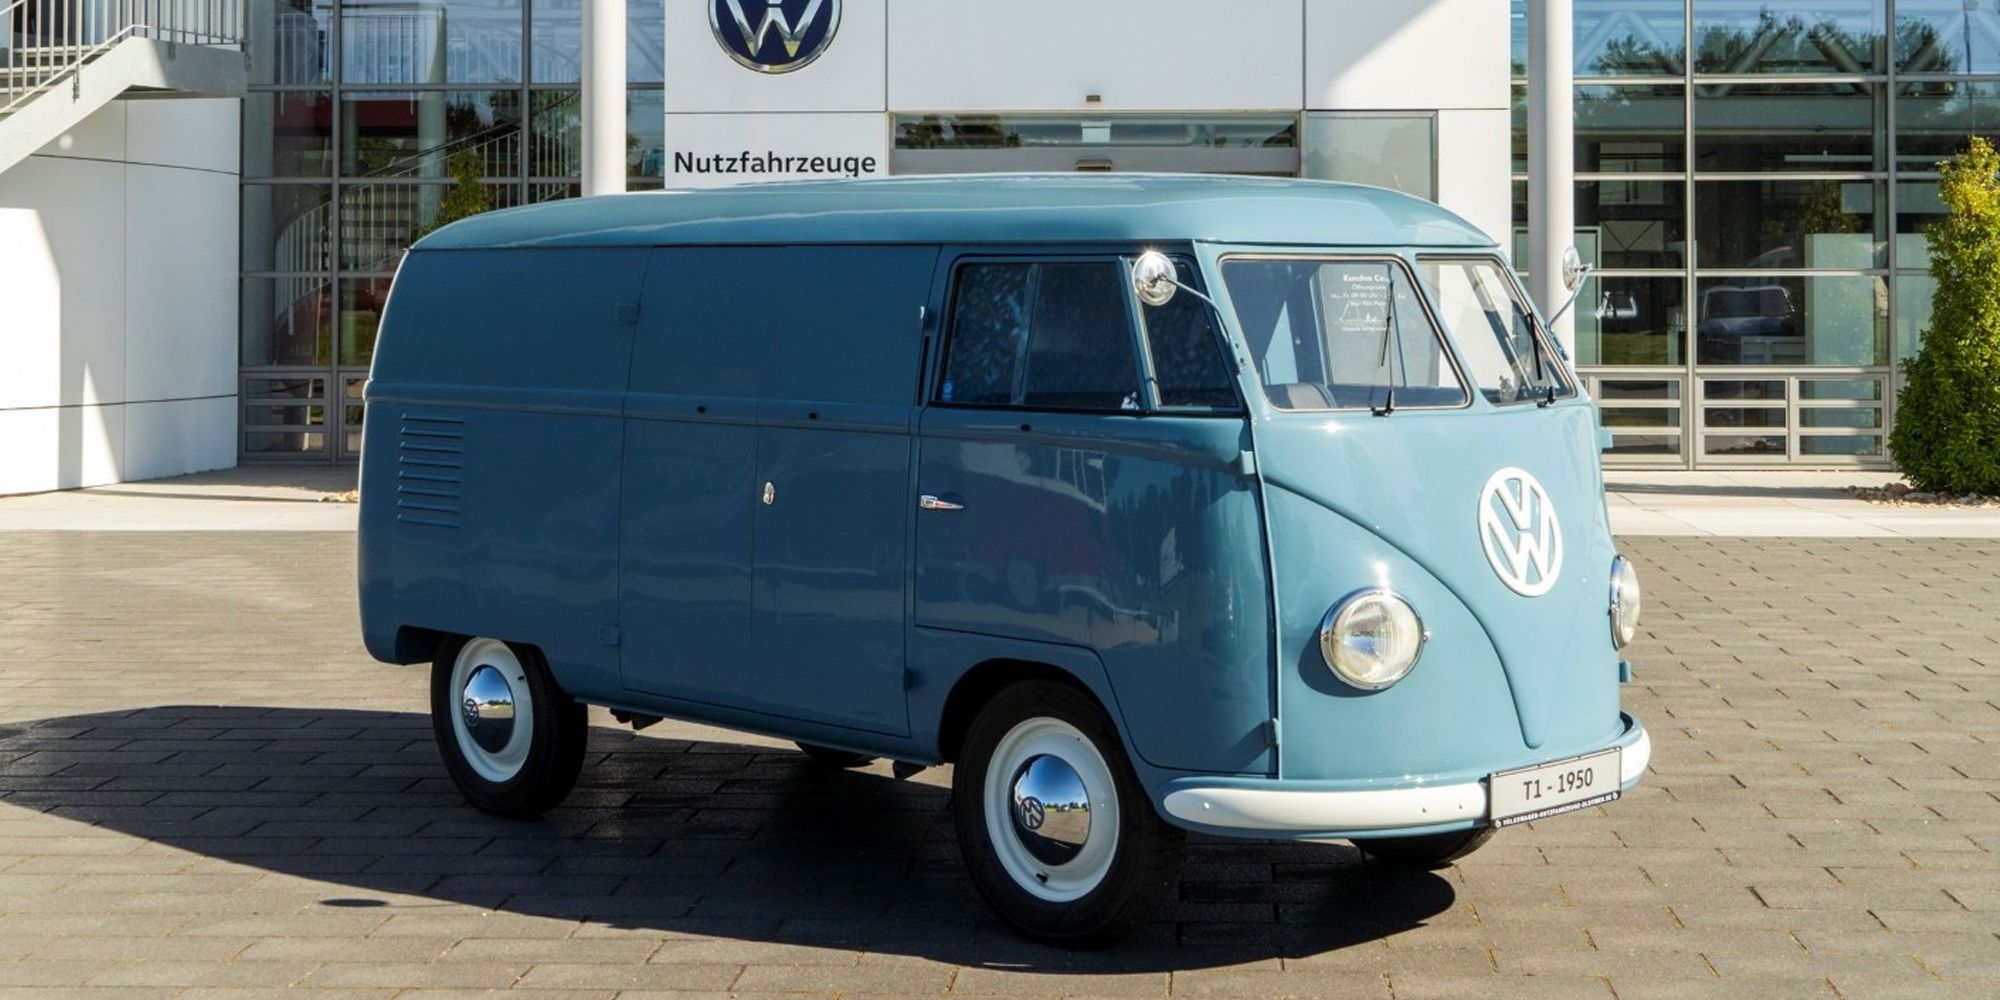 The first VW Bus in blue